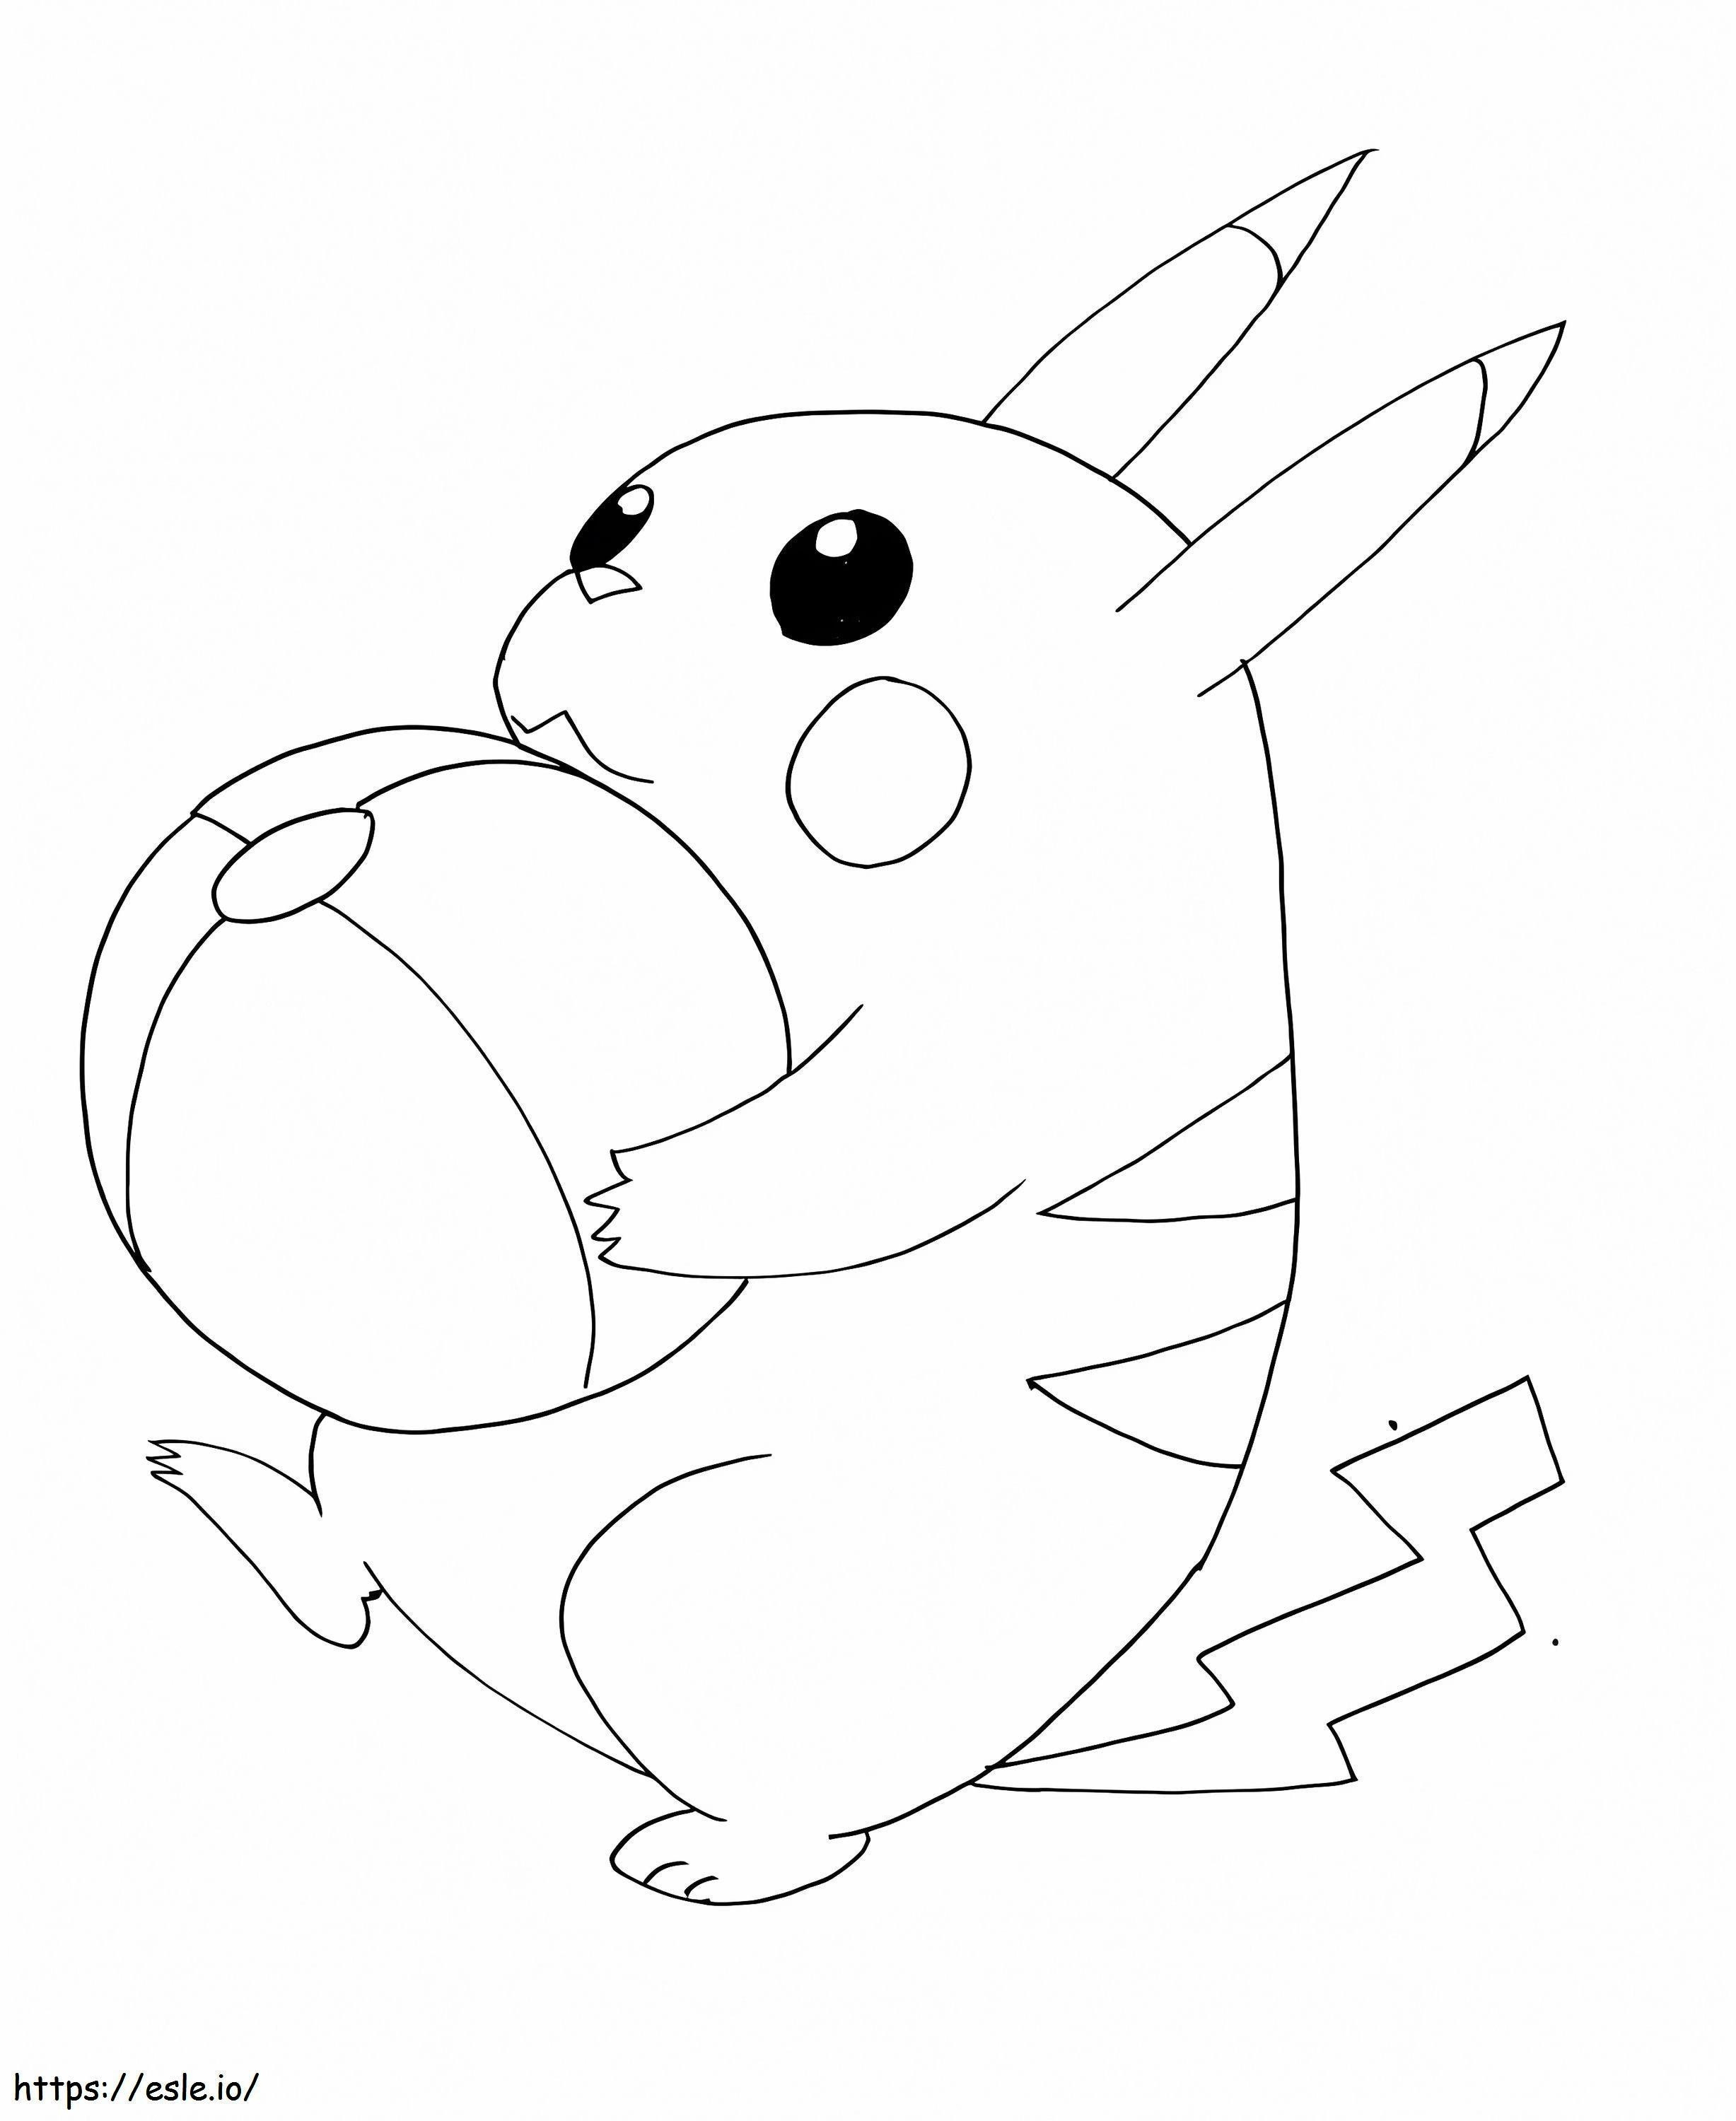 Pikachu With A Ball coloring page